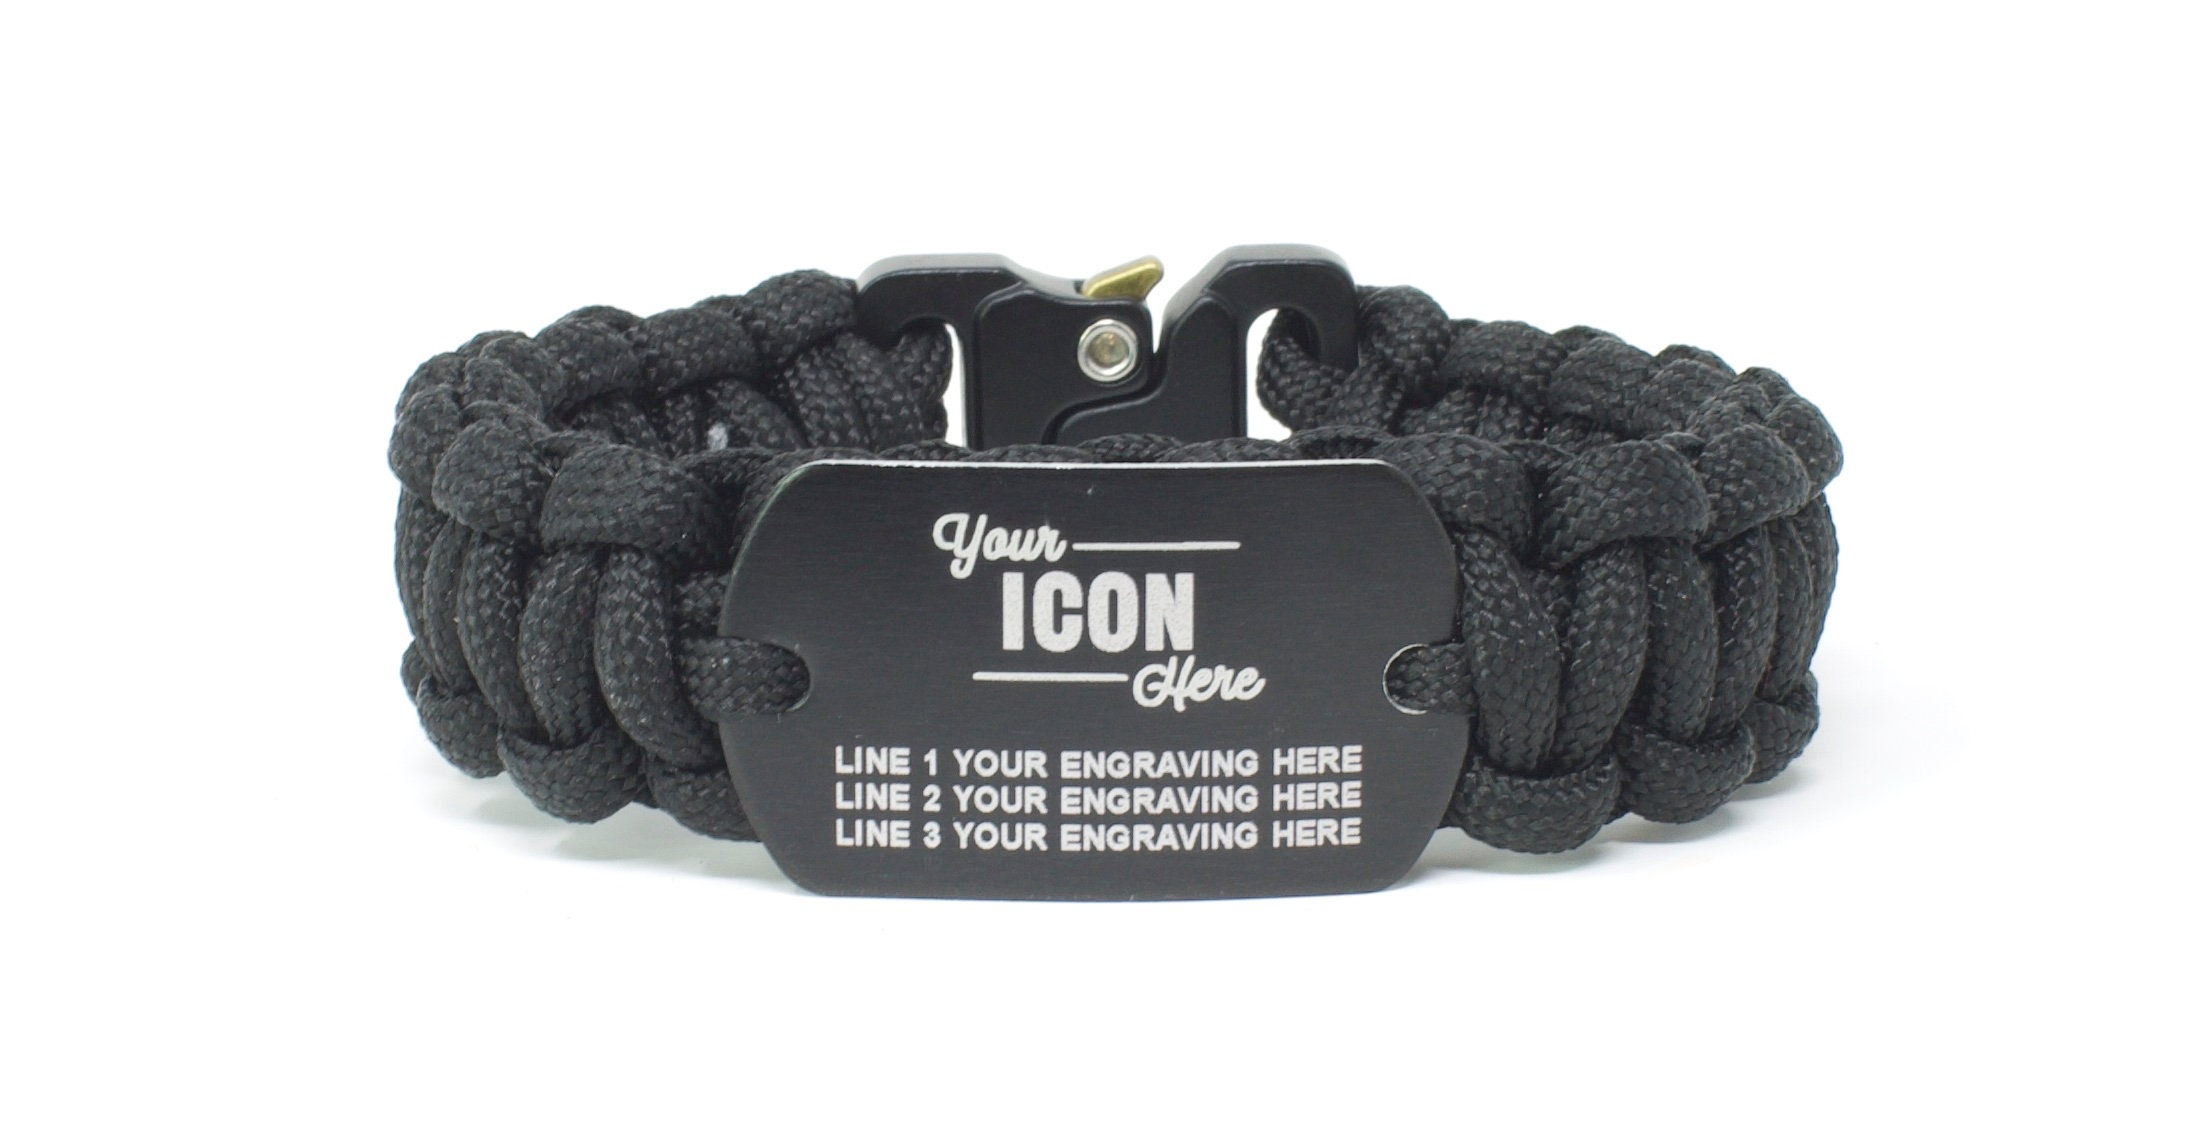 EDC and Tactical Paracord Accessories Handmade Keychains 